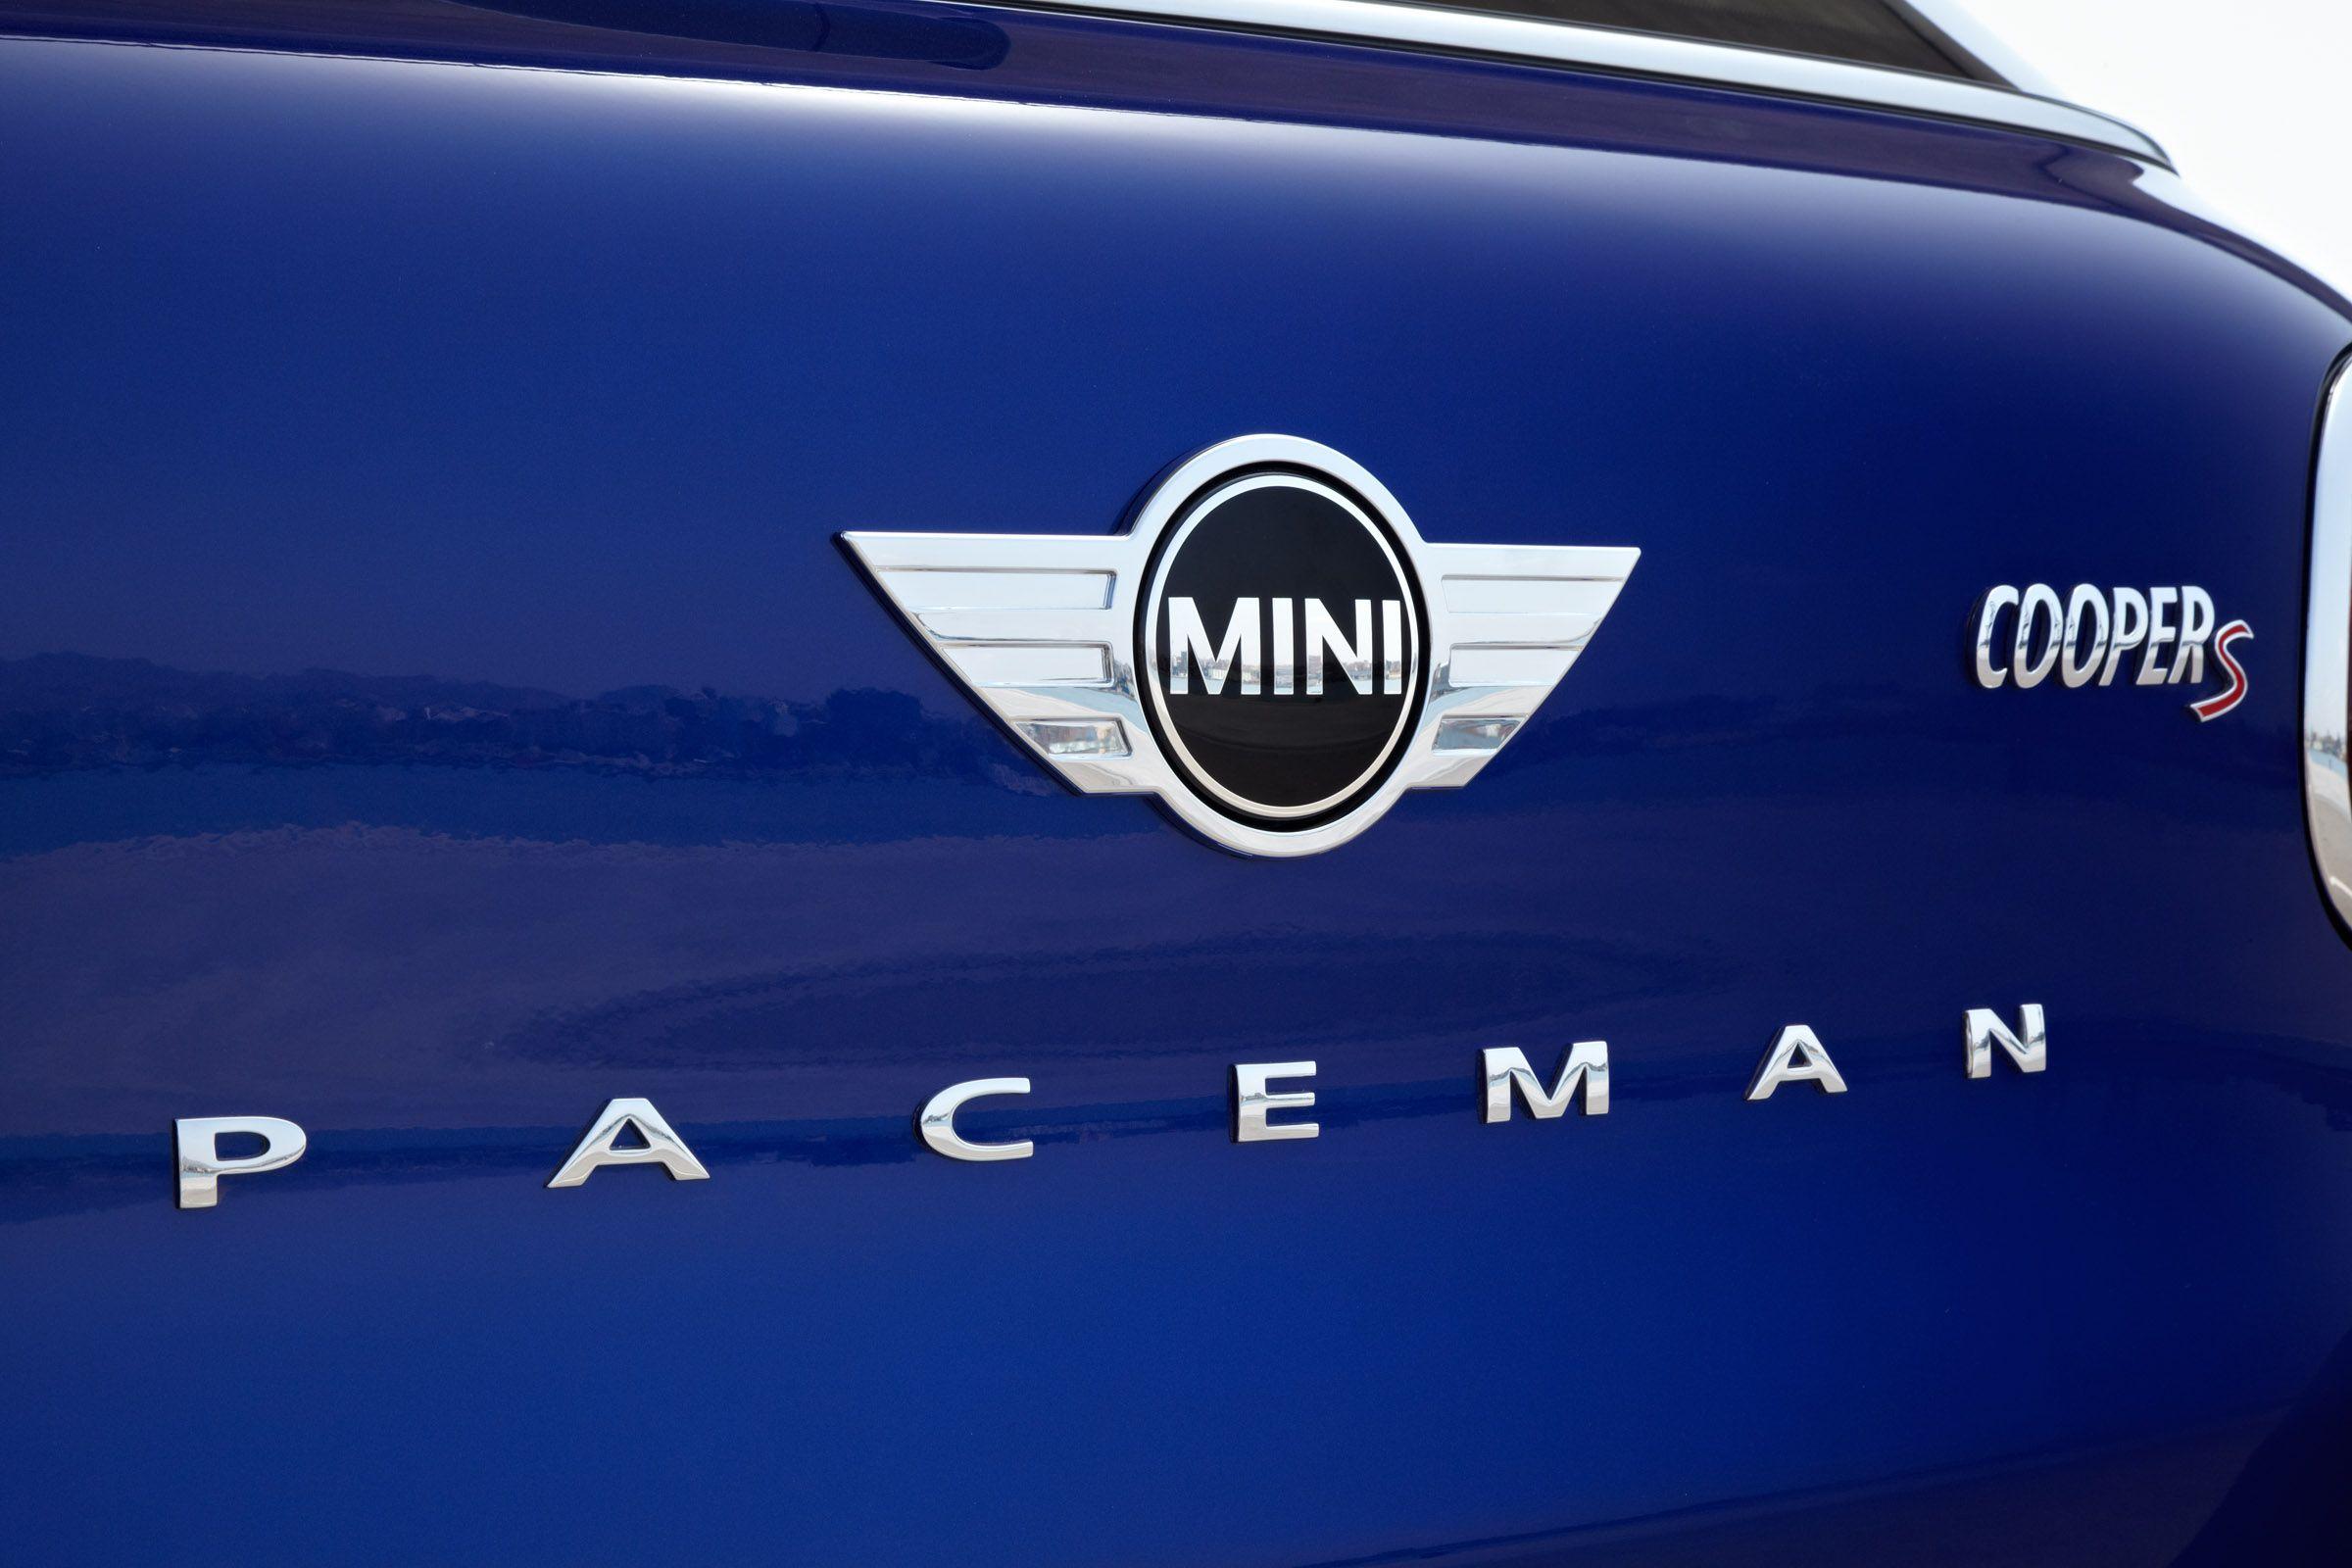 Mini Cooper Car Logo - Mini Cooper Logo, Mini Car Symbol Meaning and History. Car Brand